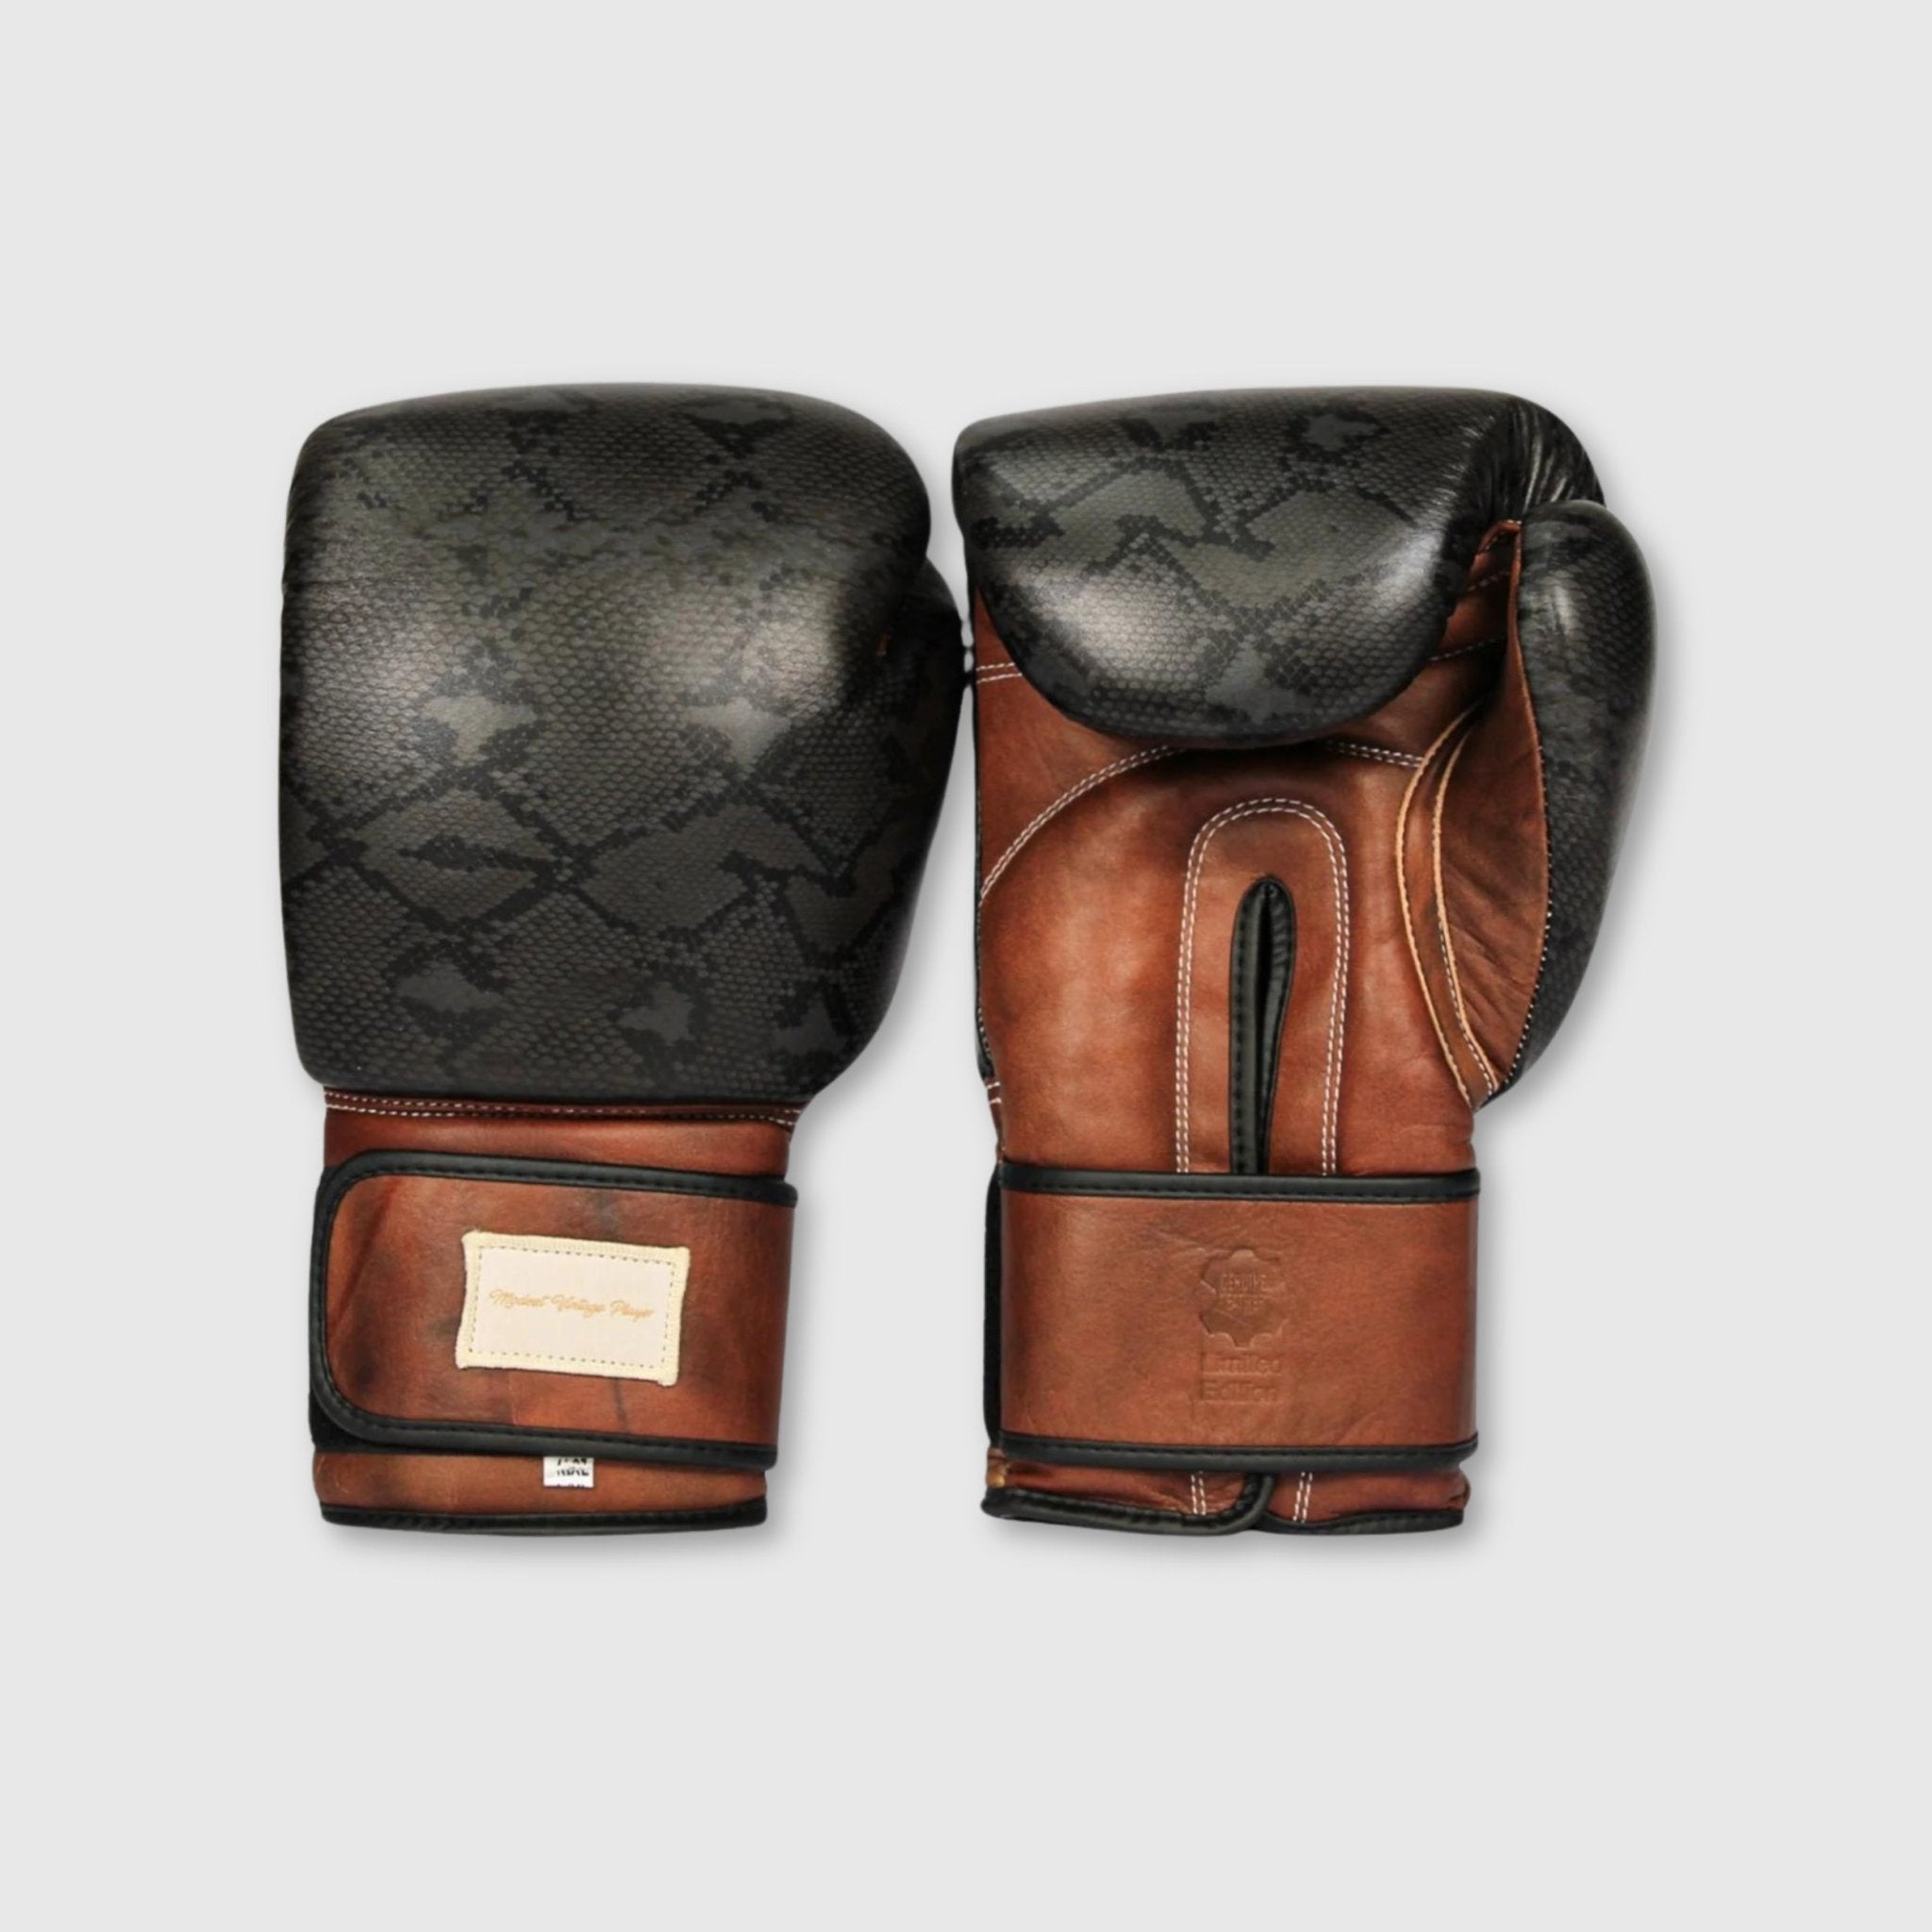 PRO Black Python Print Leather Boxing Gloves (Strap Up) Limited Edition